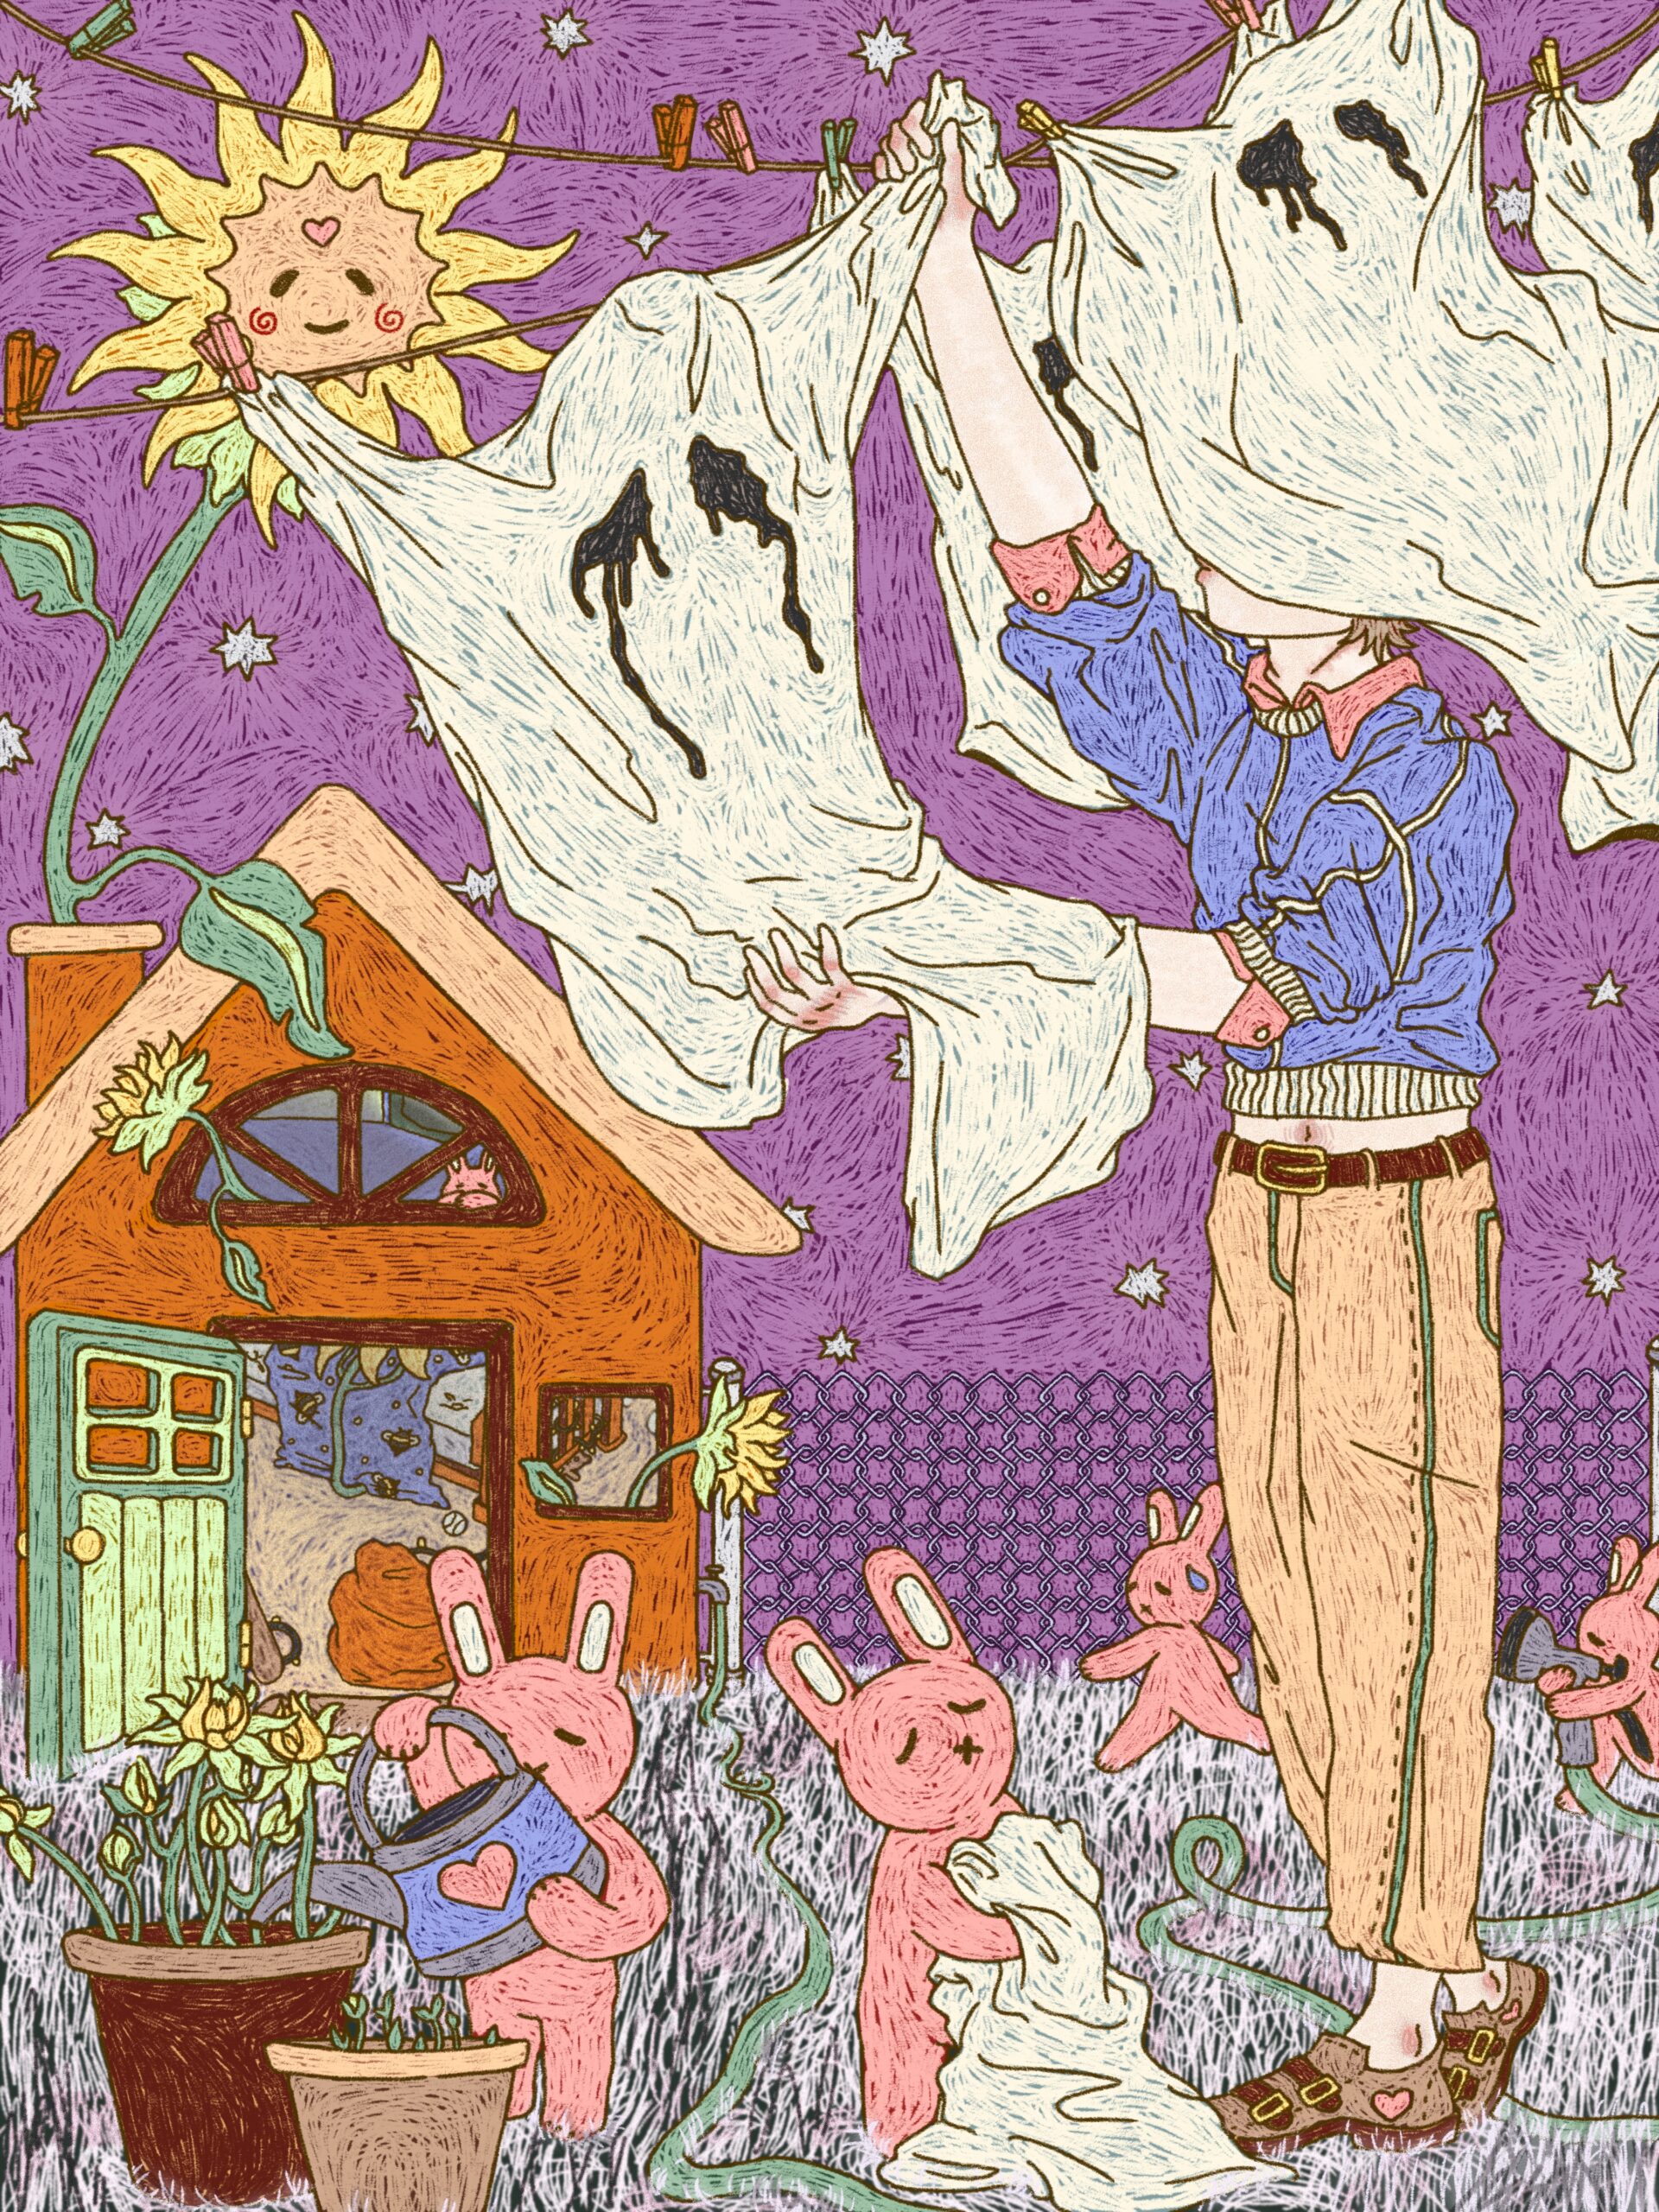 In this scene, a pale thin person hangs ghosts on a clothesline to dry, assisted by small sad pink bunnies. One bunny waters potted plants in front of a small orange house with large sunflowers growing out the windows. The sky is lilac and dotted with white stars. The largest yellow sunflower looks on from above, like a sun, with a smile.